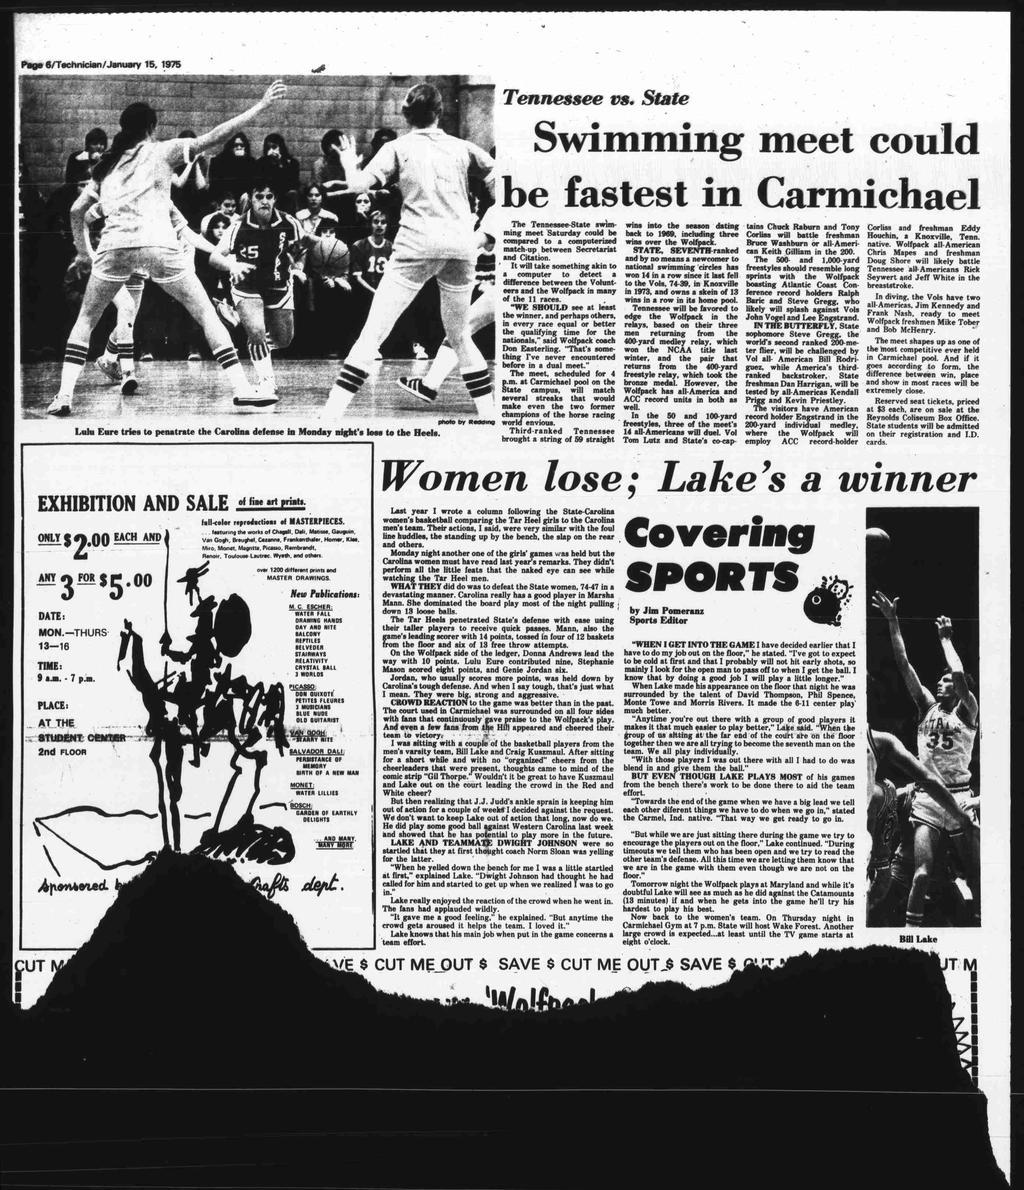 ' Paced/Technician/Januaw 15, 1975 Tennessee vs State be fastest in Carmichael The TennesseeState swimming meet Saturday wins into season dating 'tains could be Chuck Raburn Tony back to 1969